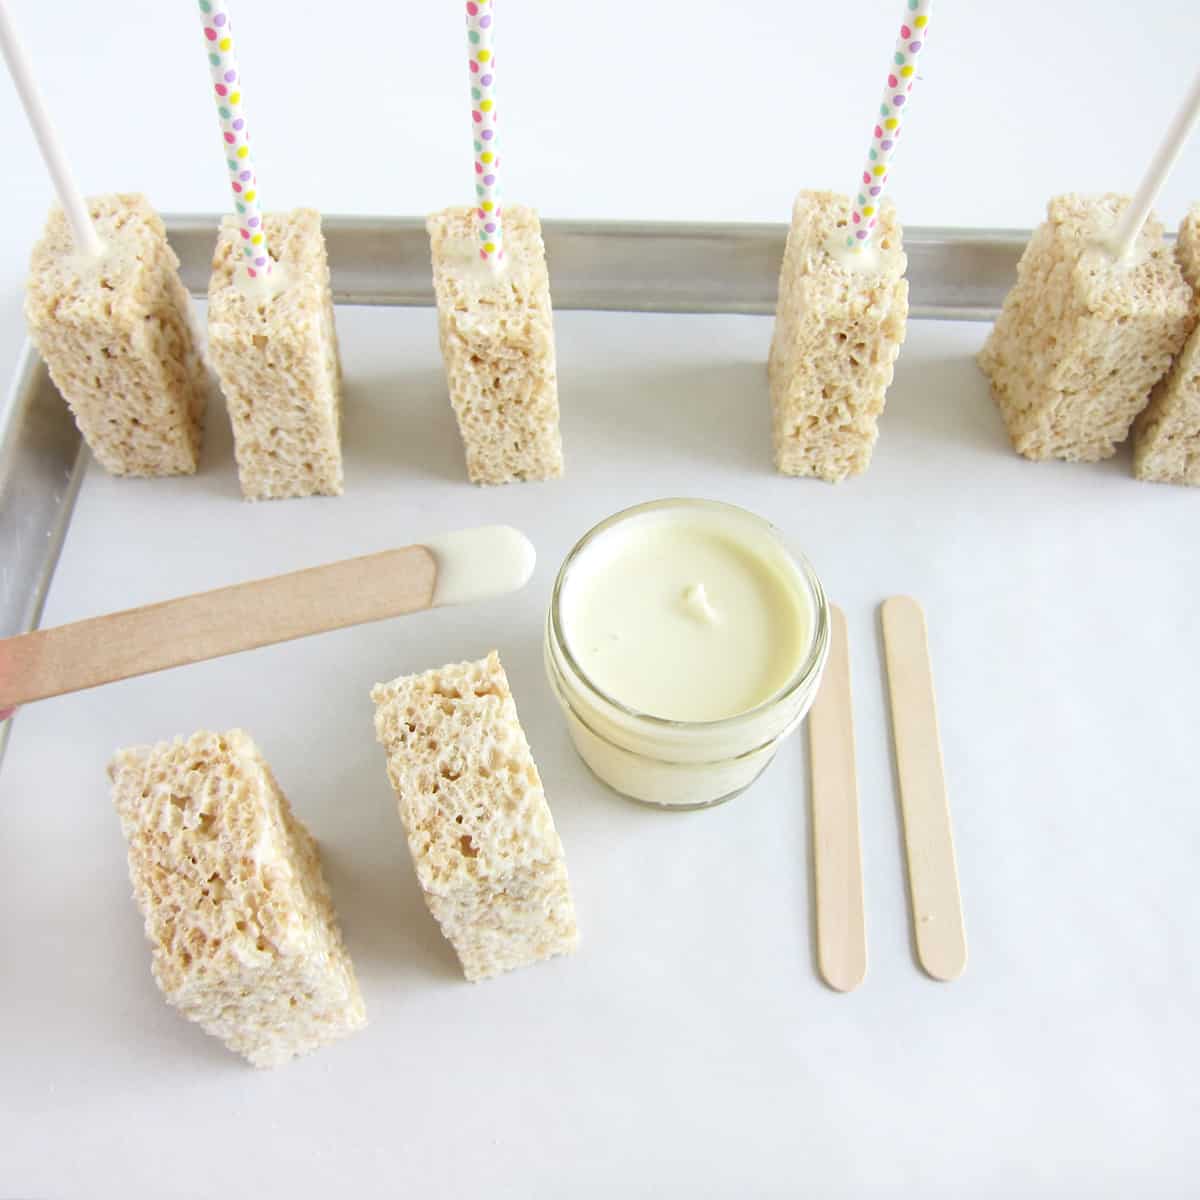 Popsicle stick dipped in melted white chocolate on a tray with Rice Krispie Treat pops.